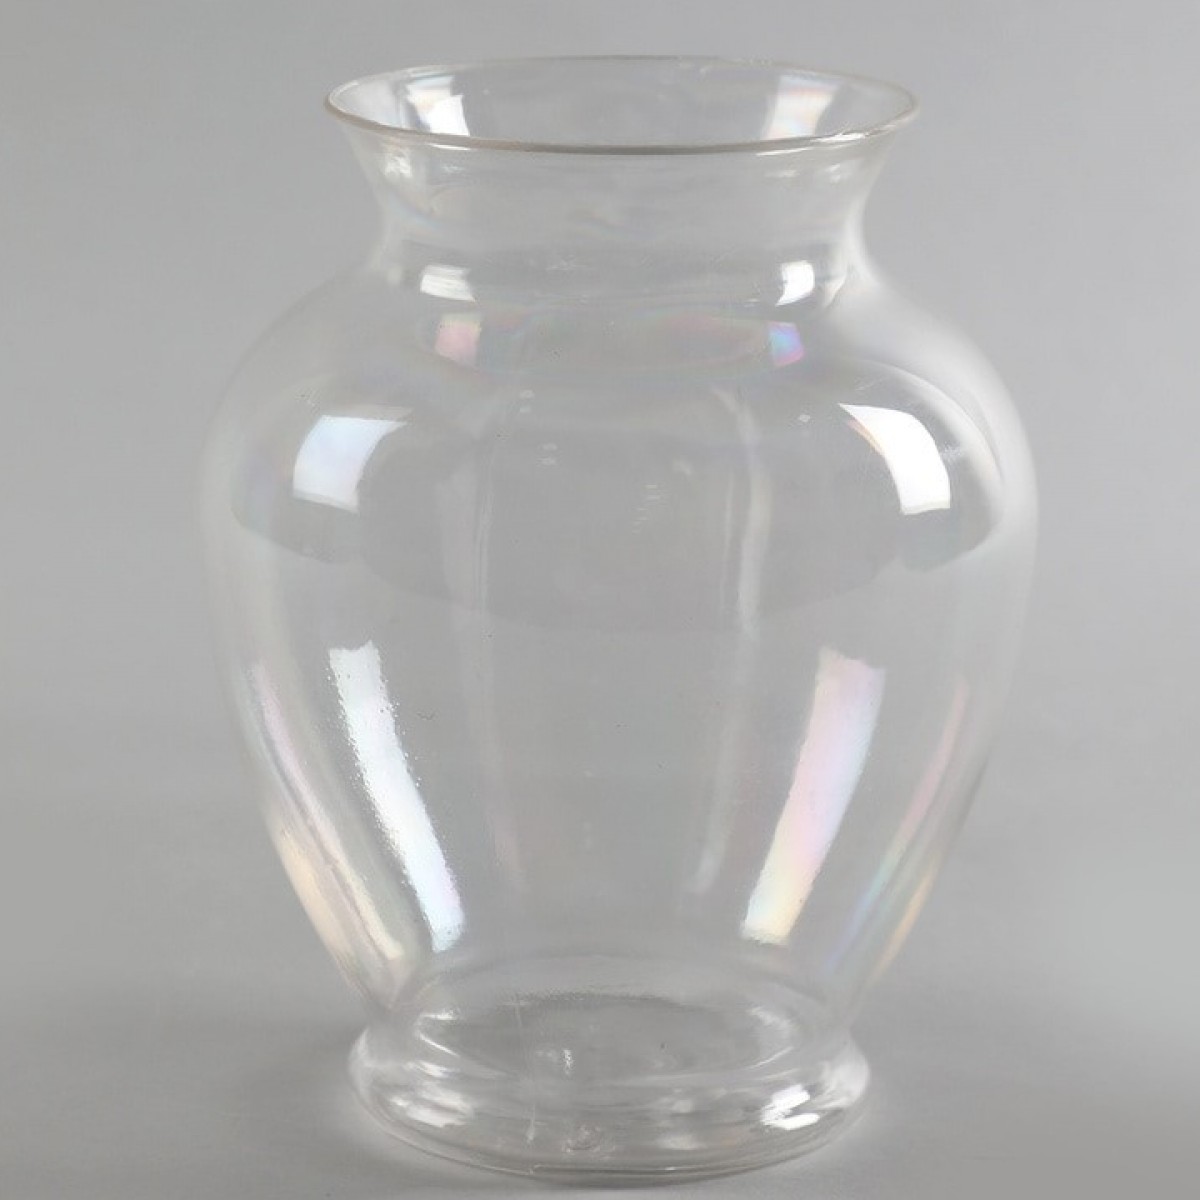 5103 Ginger Clear 9x16cm Acrylic Vase - 1 No